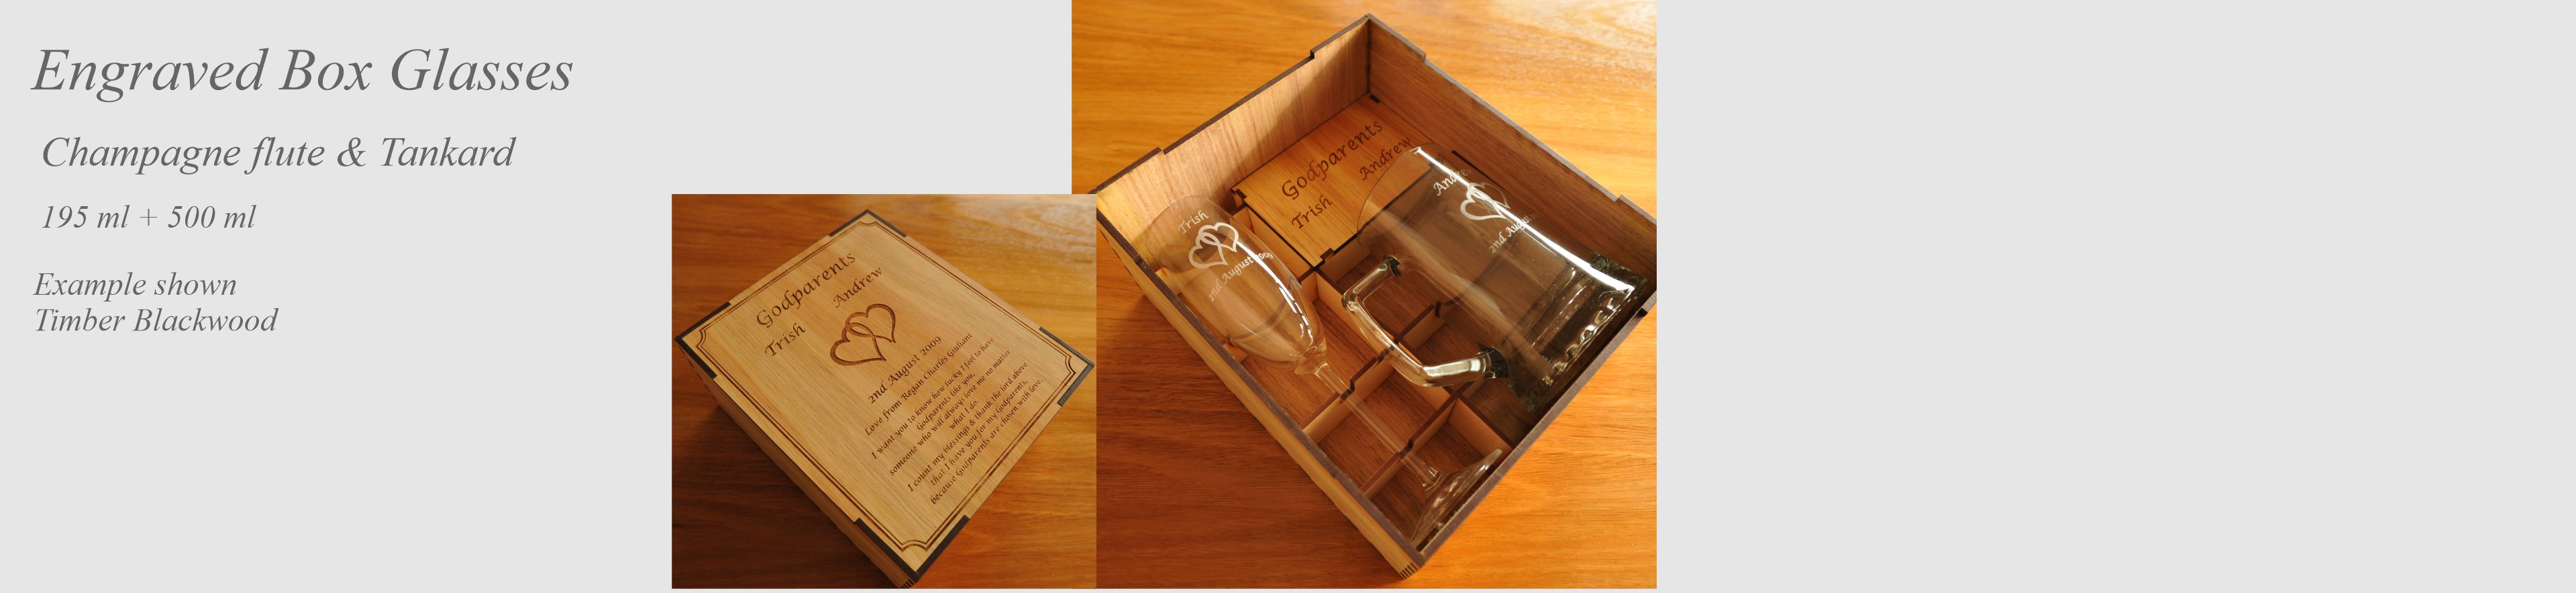 Flute and Tankard in Engraved gift box